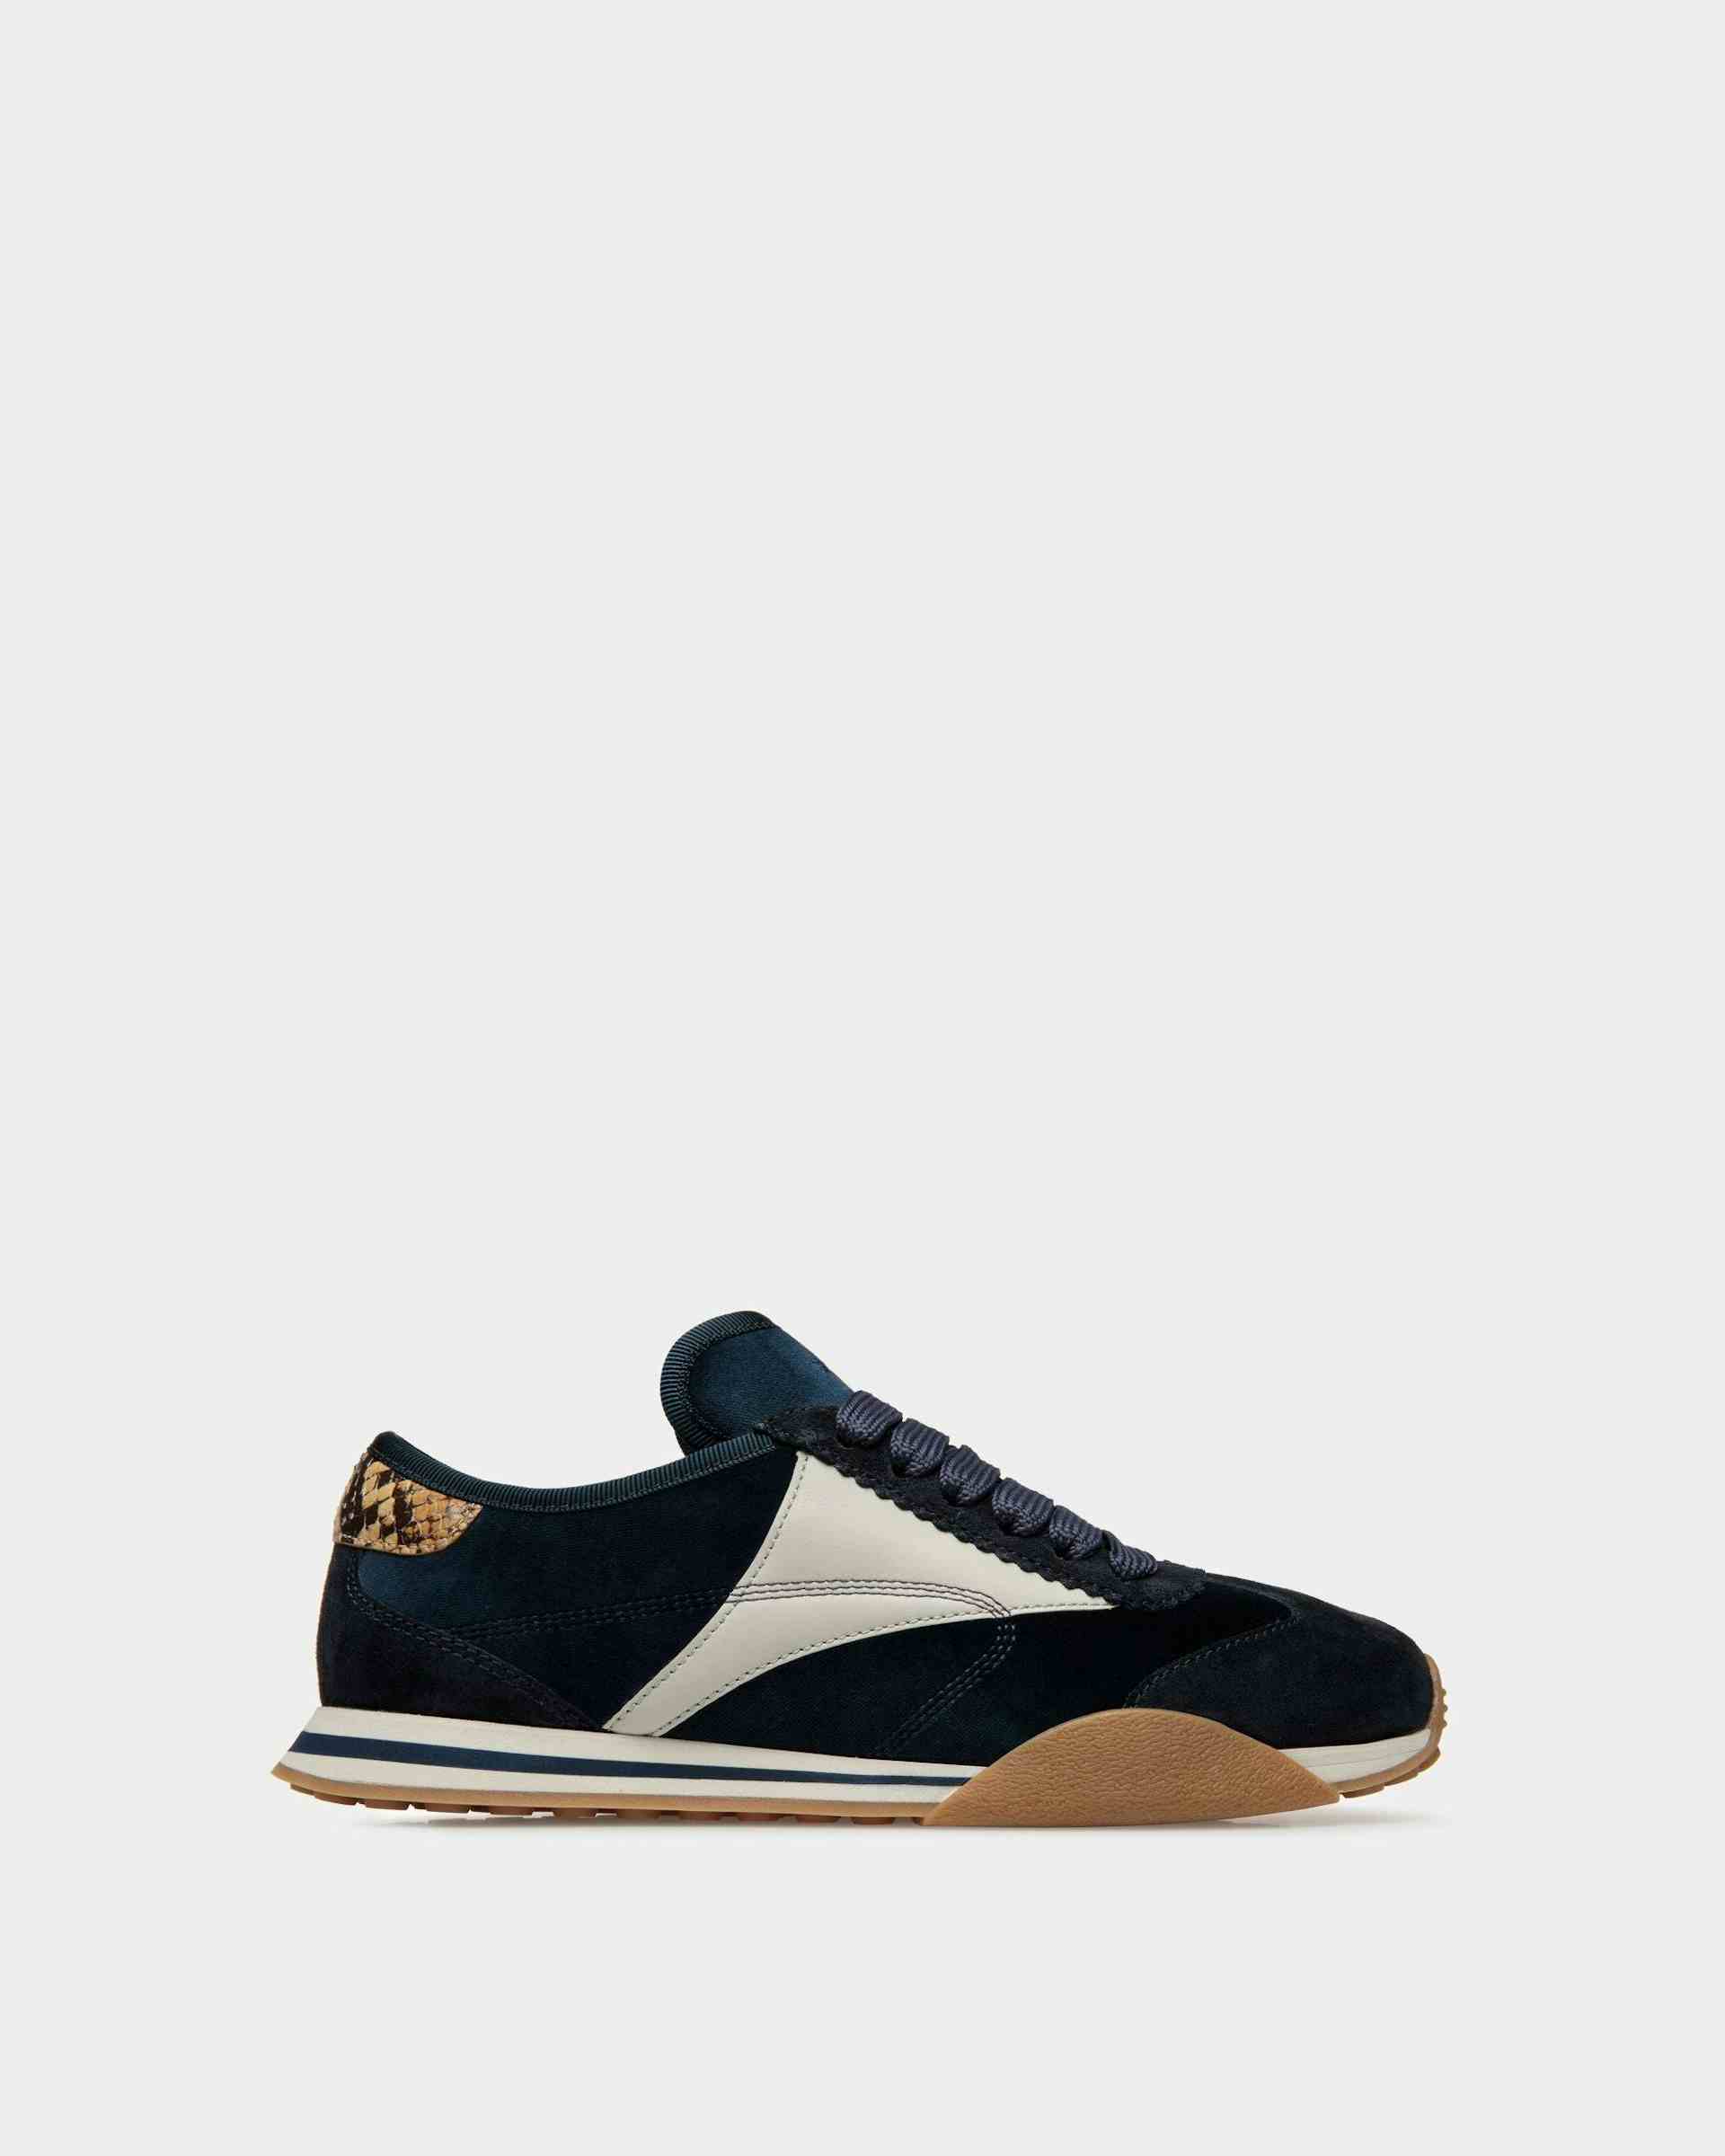 Sussex Sneakers In Midnight And Dusty White Leather And Cotton - Women's - Bally